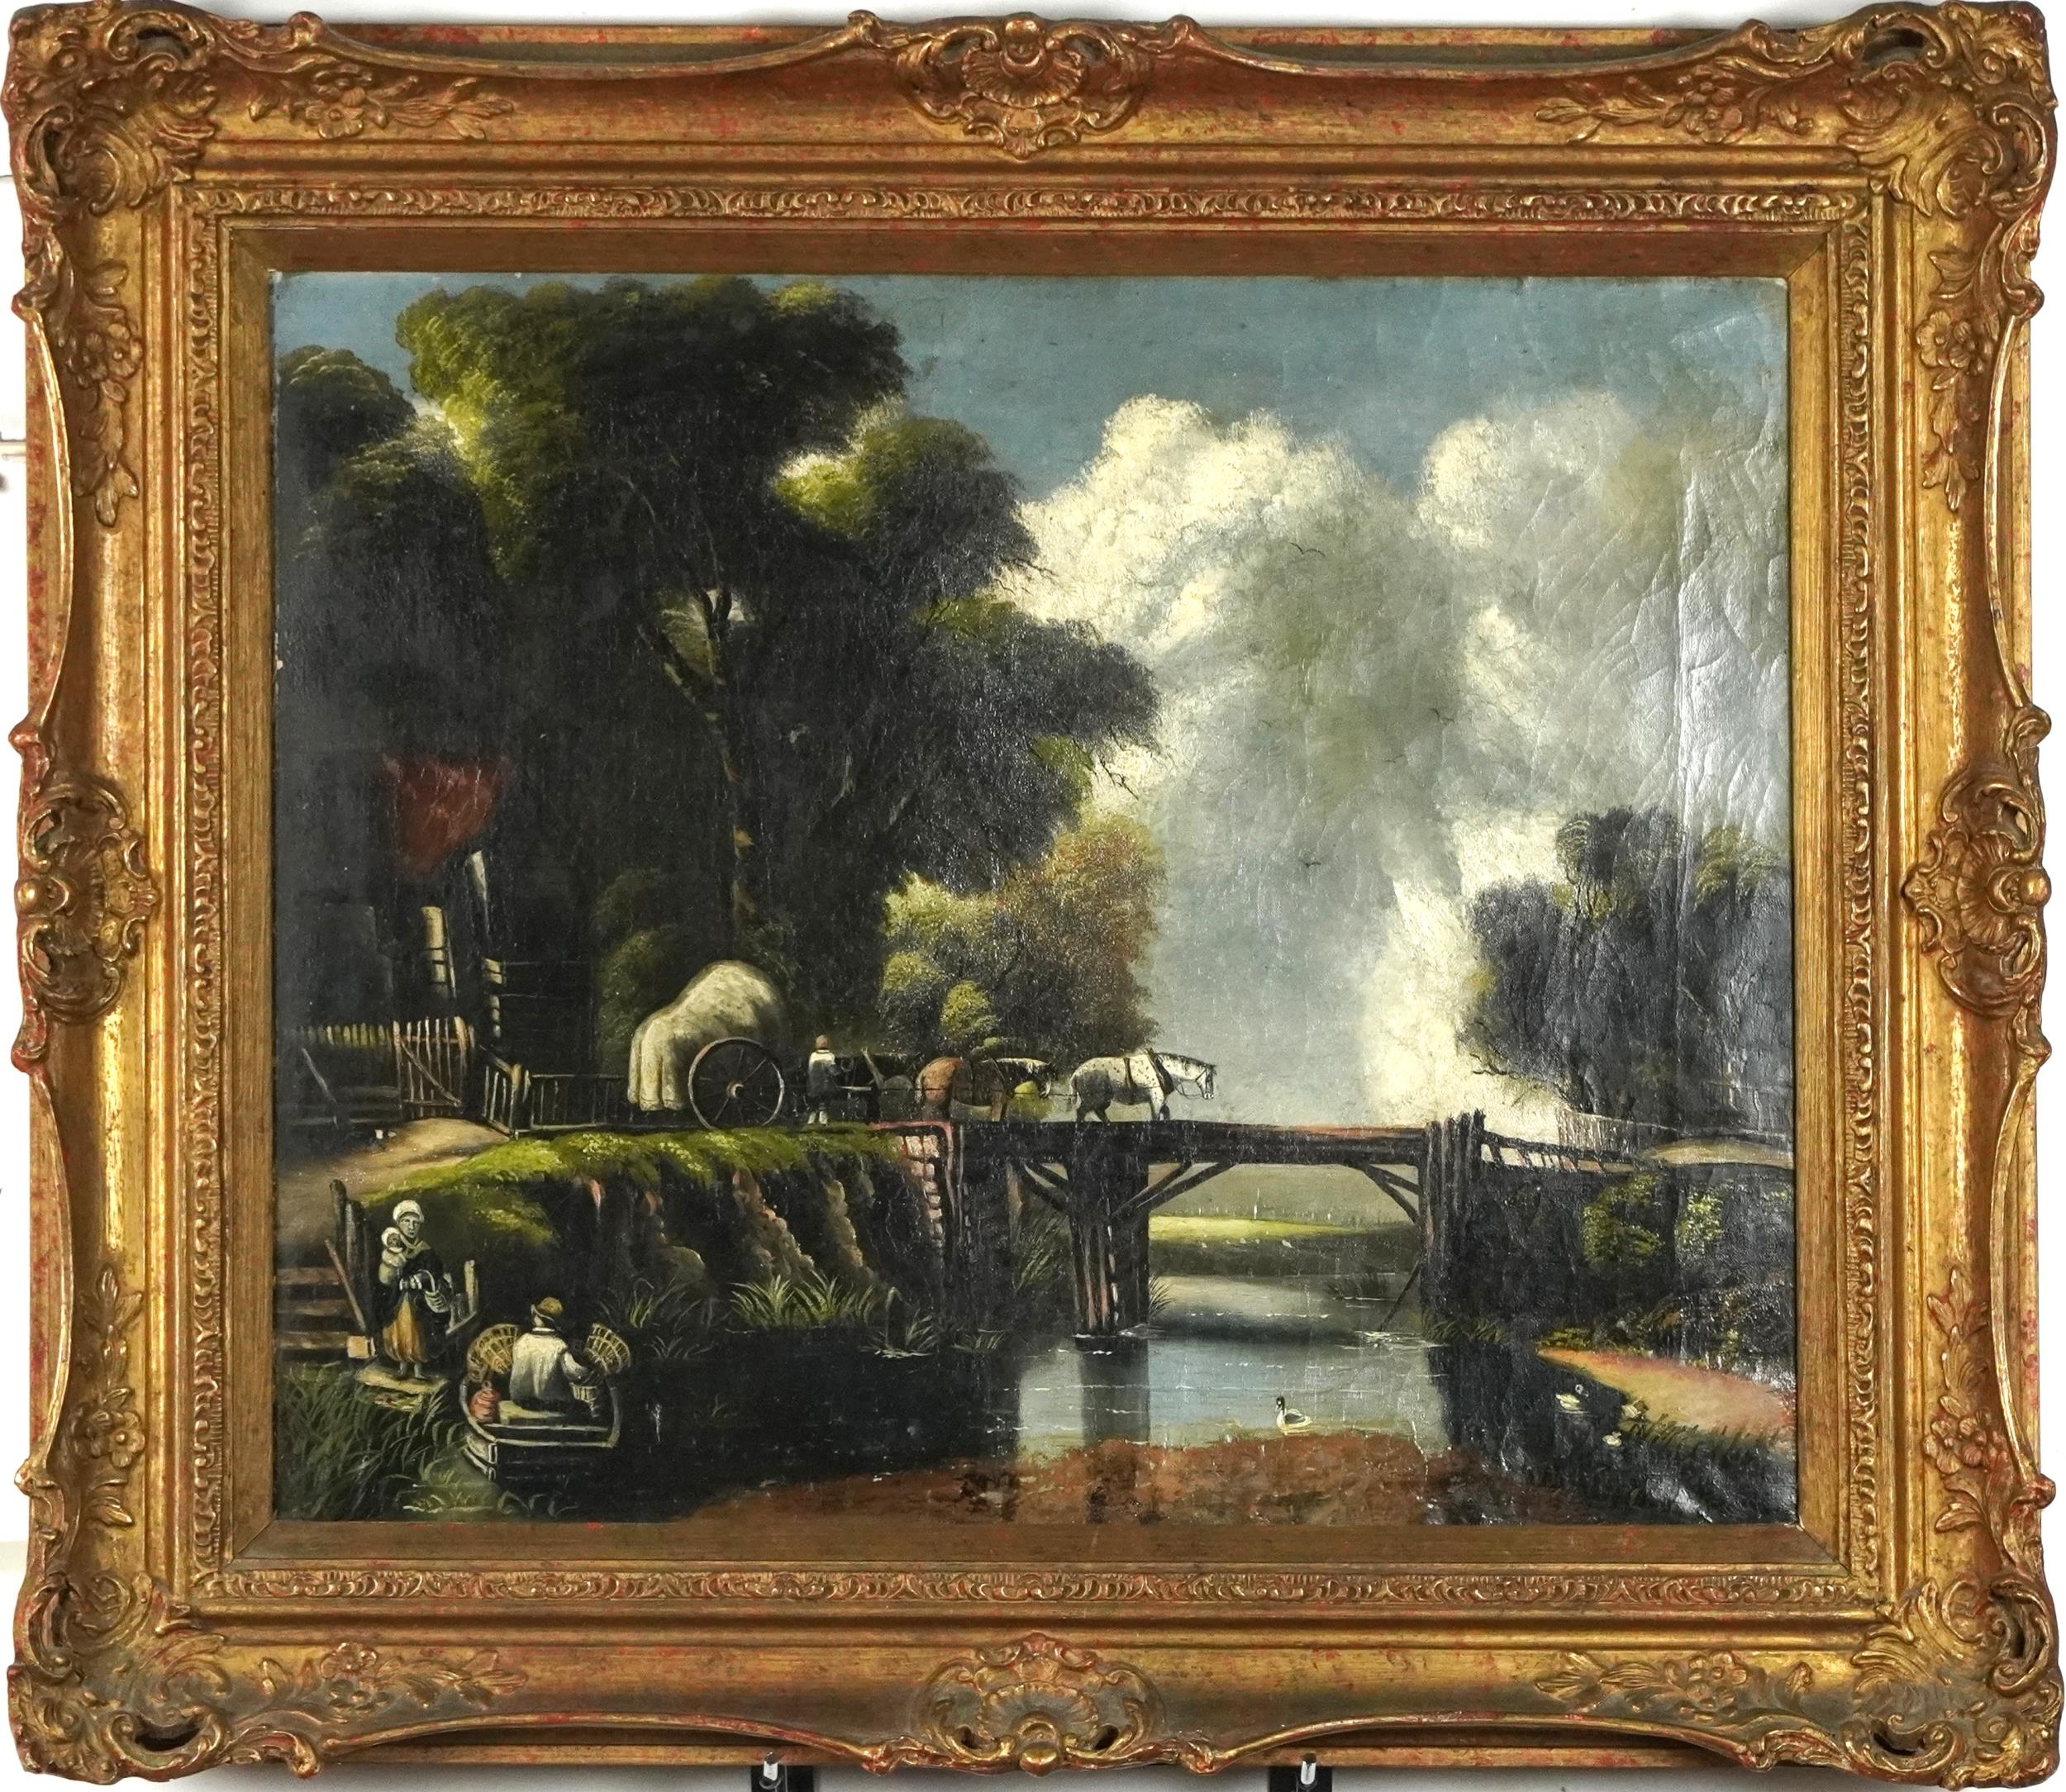 After Sir Augustus Wall Callcott - Horse drawn cart on bridge over water, English school oil on - Image 2 of 5